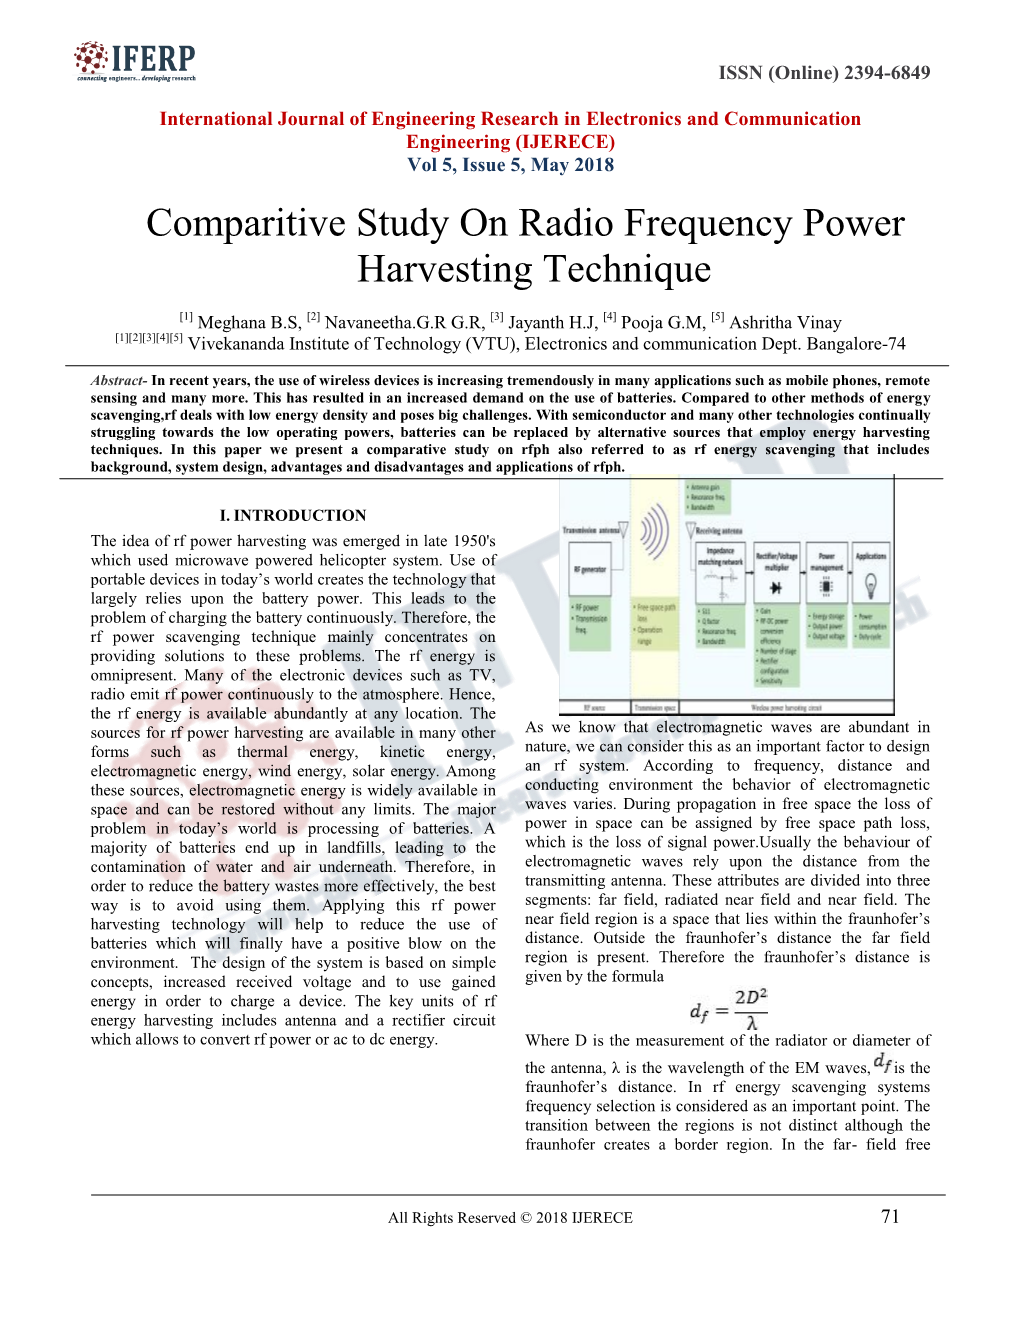 Comparitive Study on Radio Frequency Power Harvesting Technique